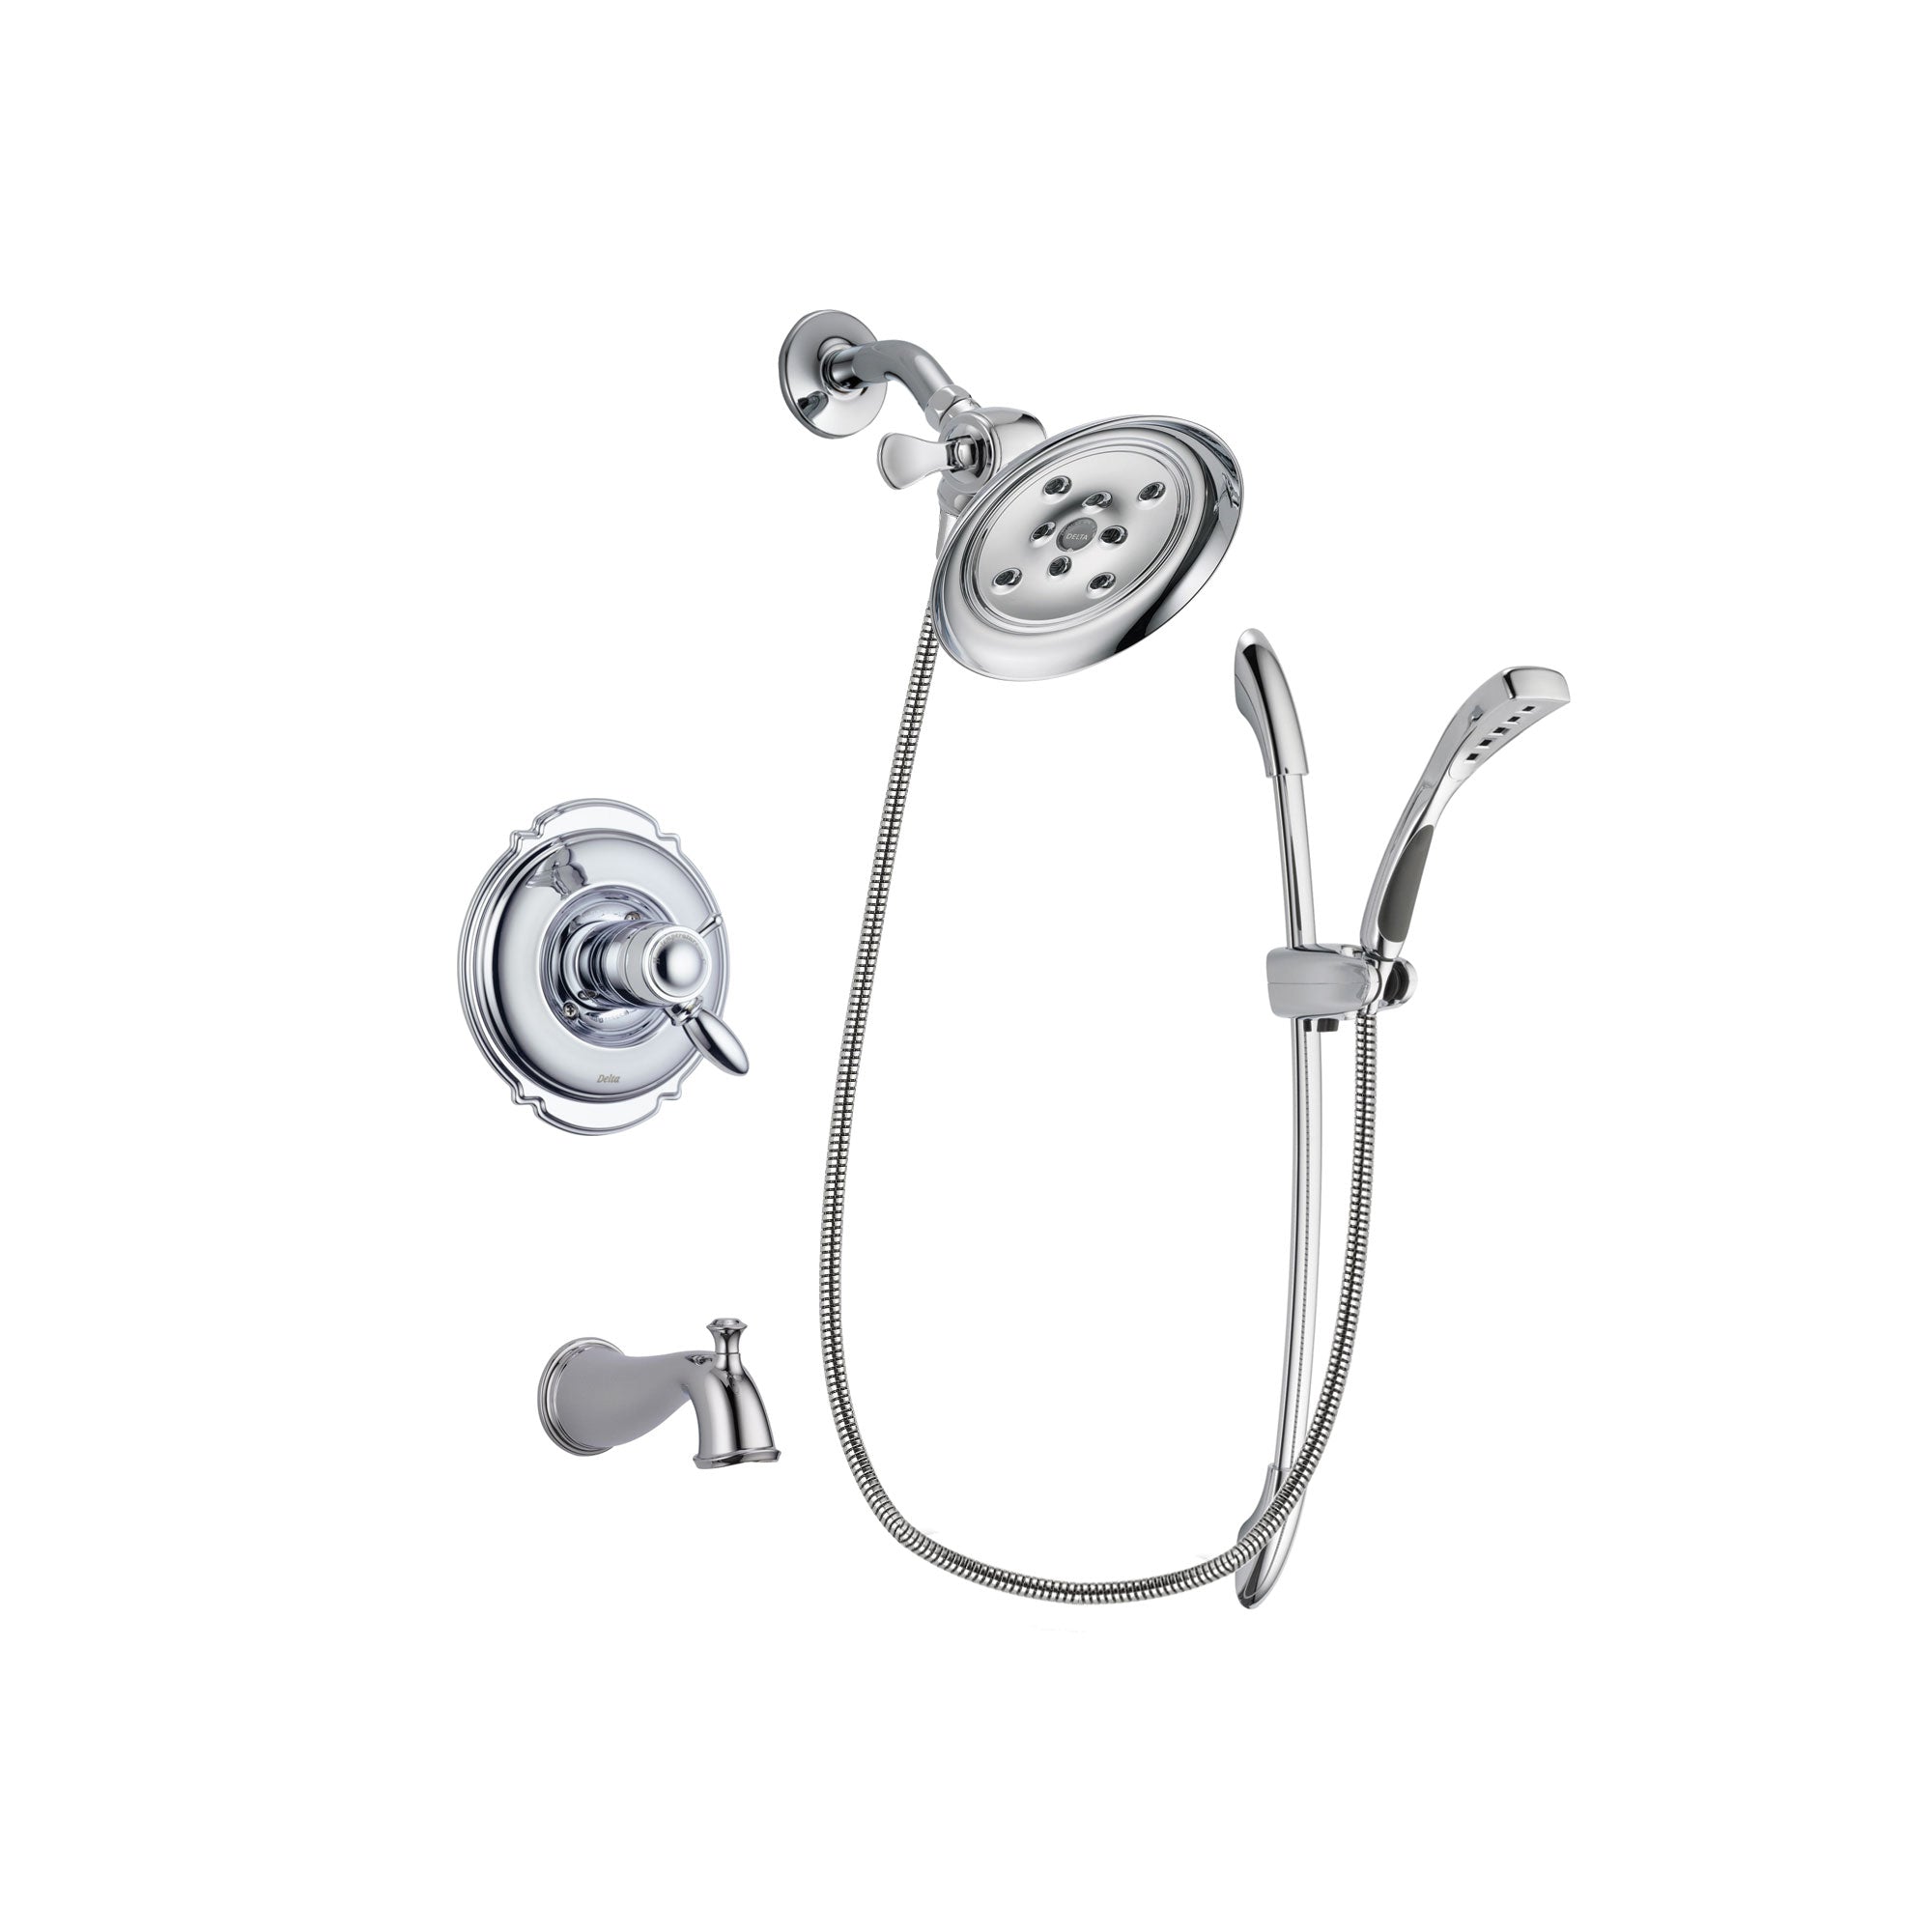 Delta Victorian Chrome Finish Thermostatic Tub and Shower Faucet System Package with Large Rain Showerhead and Handheld Shower with Slide Bar Includes Rough-in Valve and Tub Spout DSP0495V